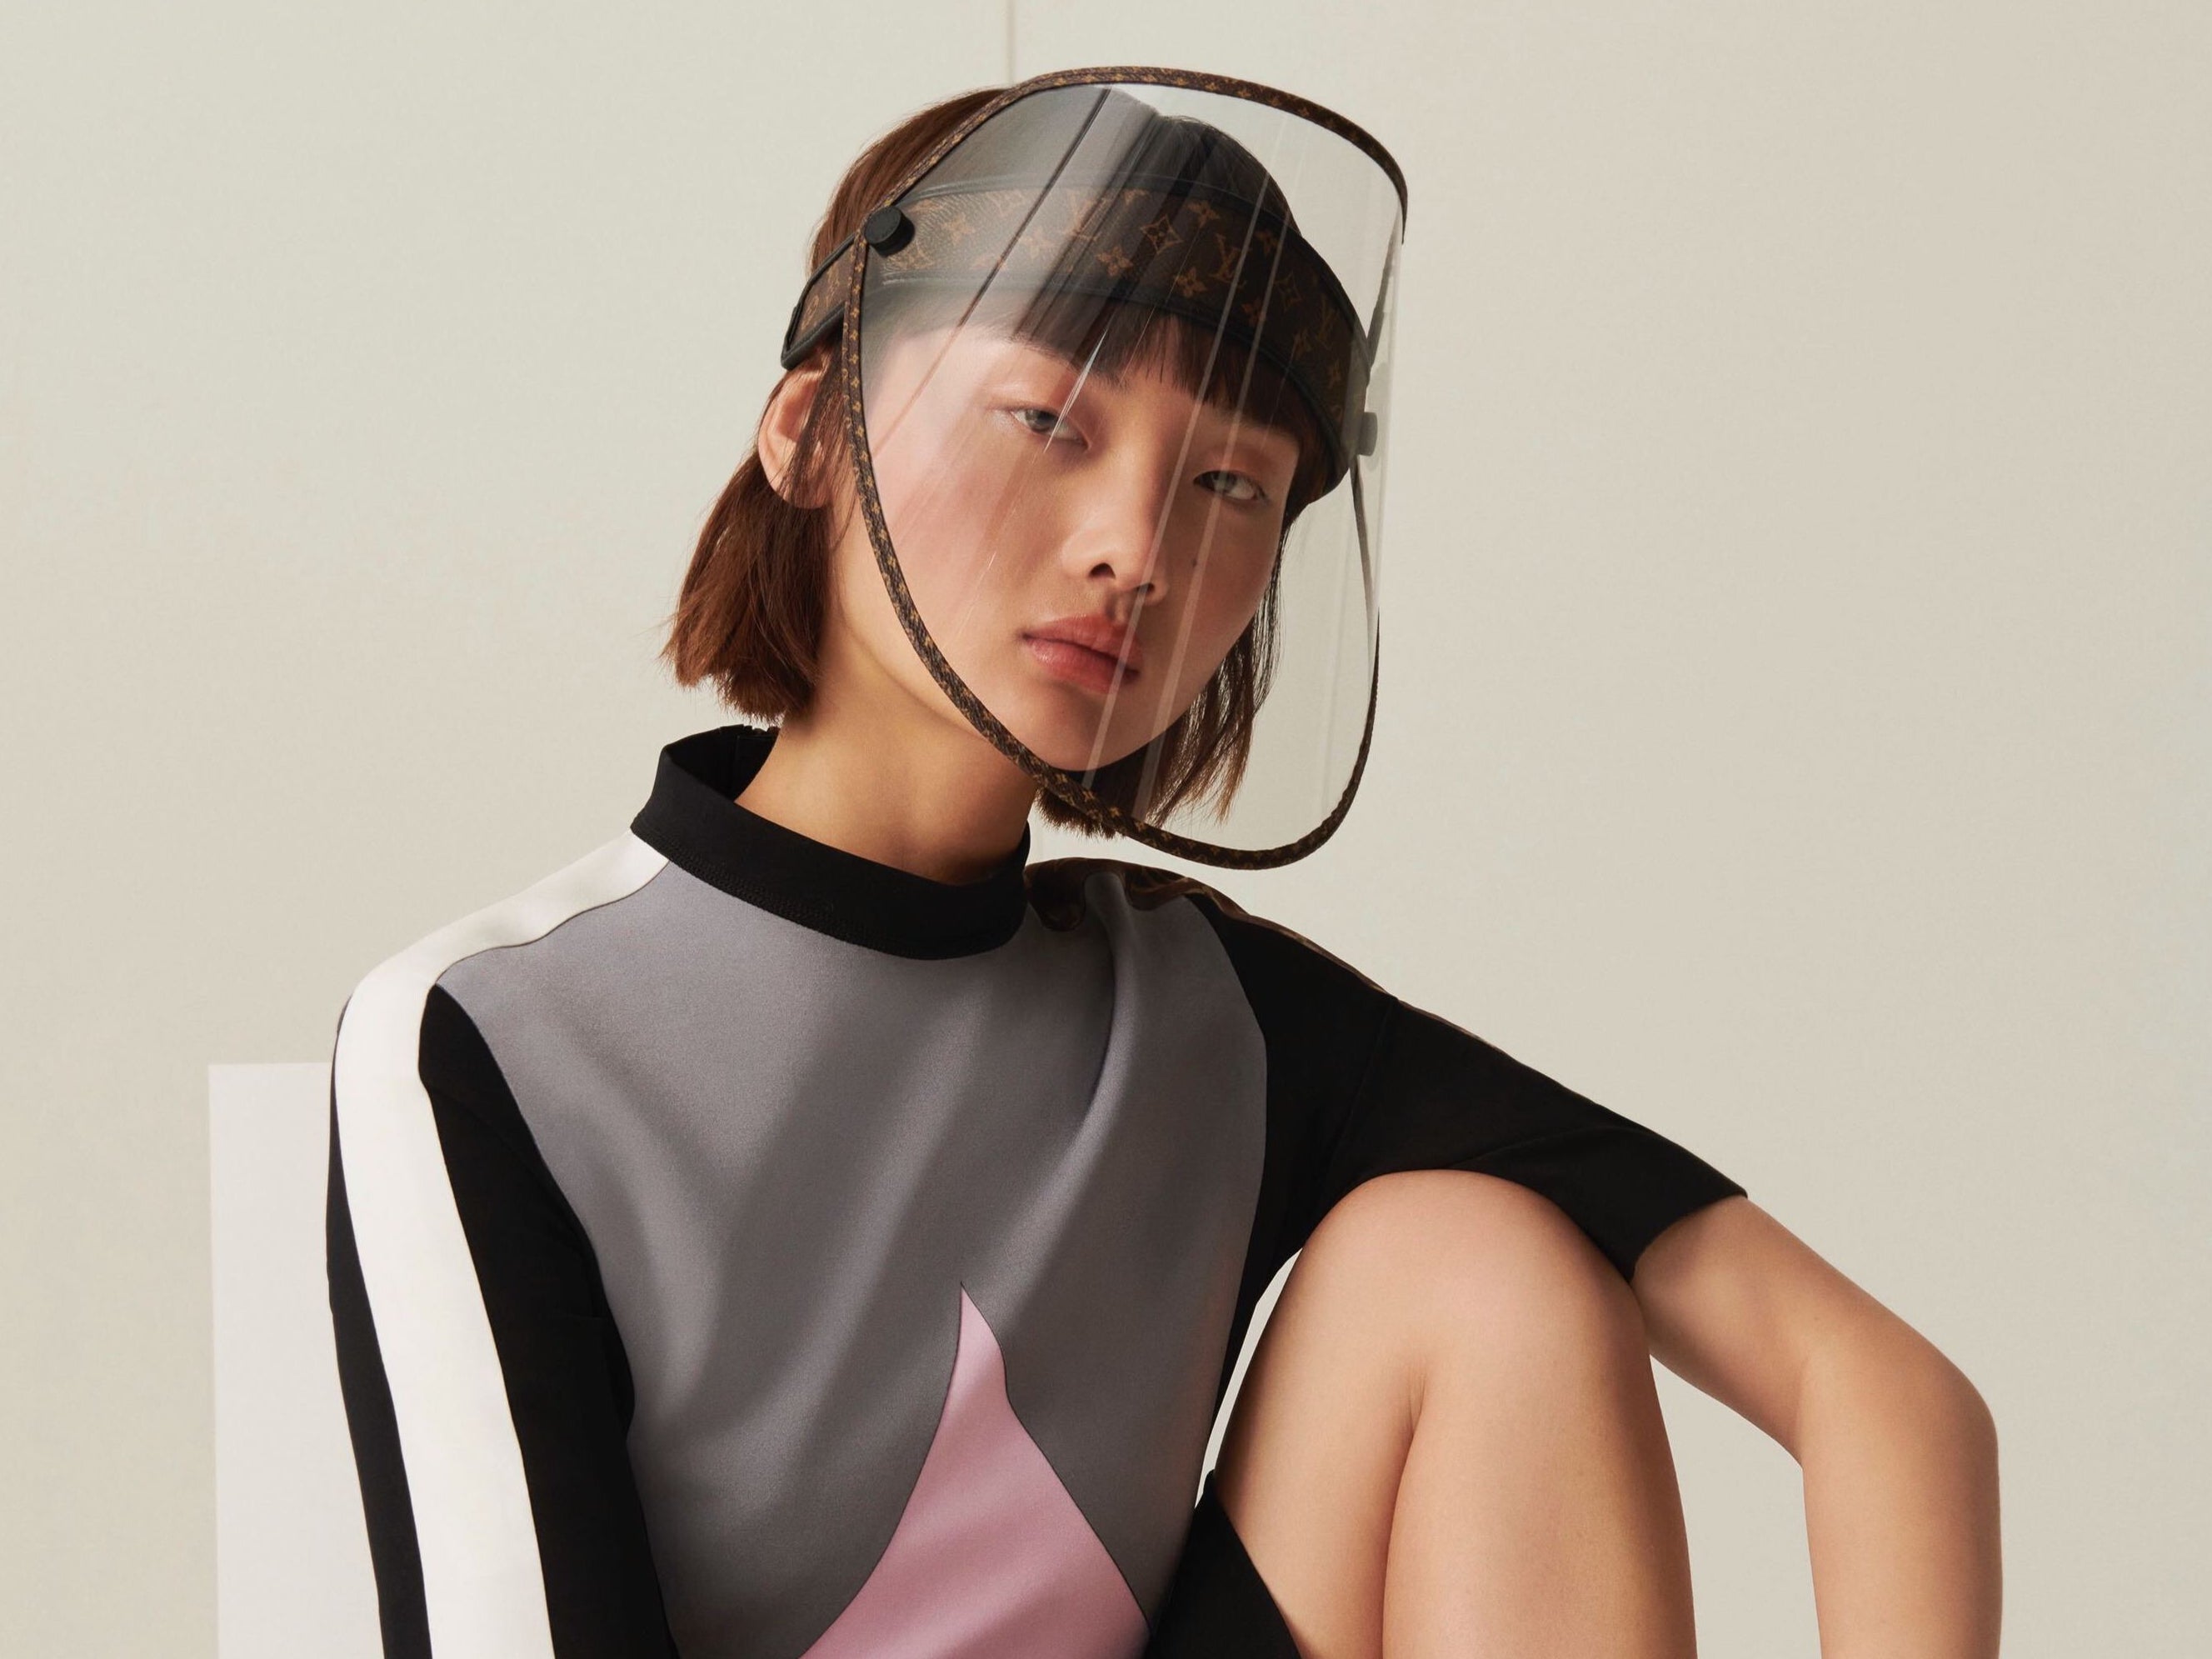 Louis Vuitton to launch £750 face shield that can also be worn as a cap | The Independent